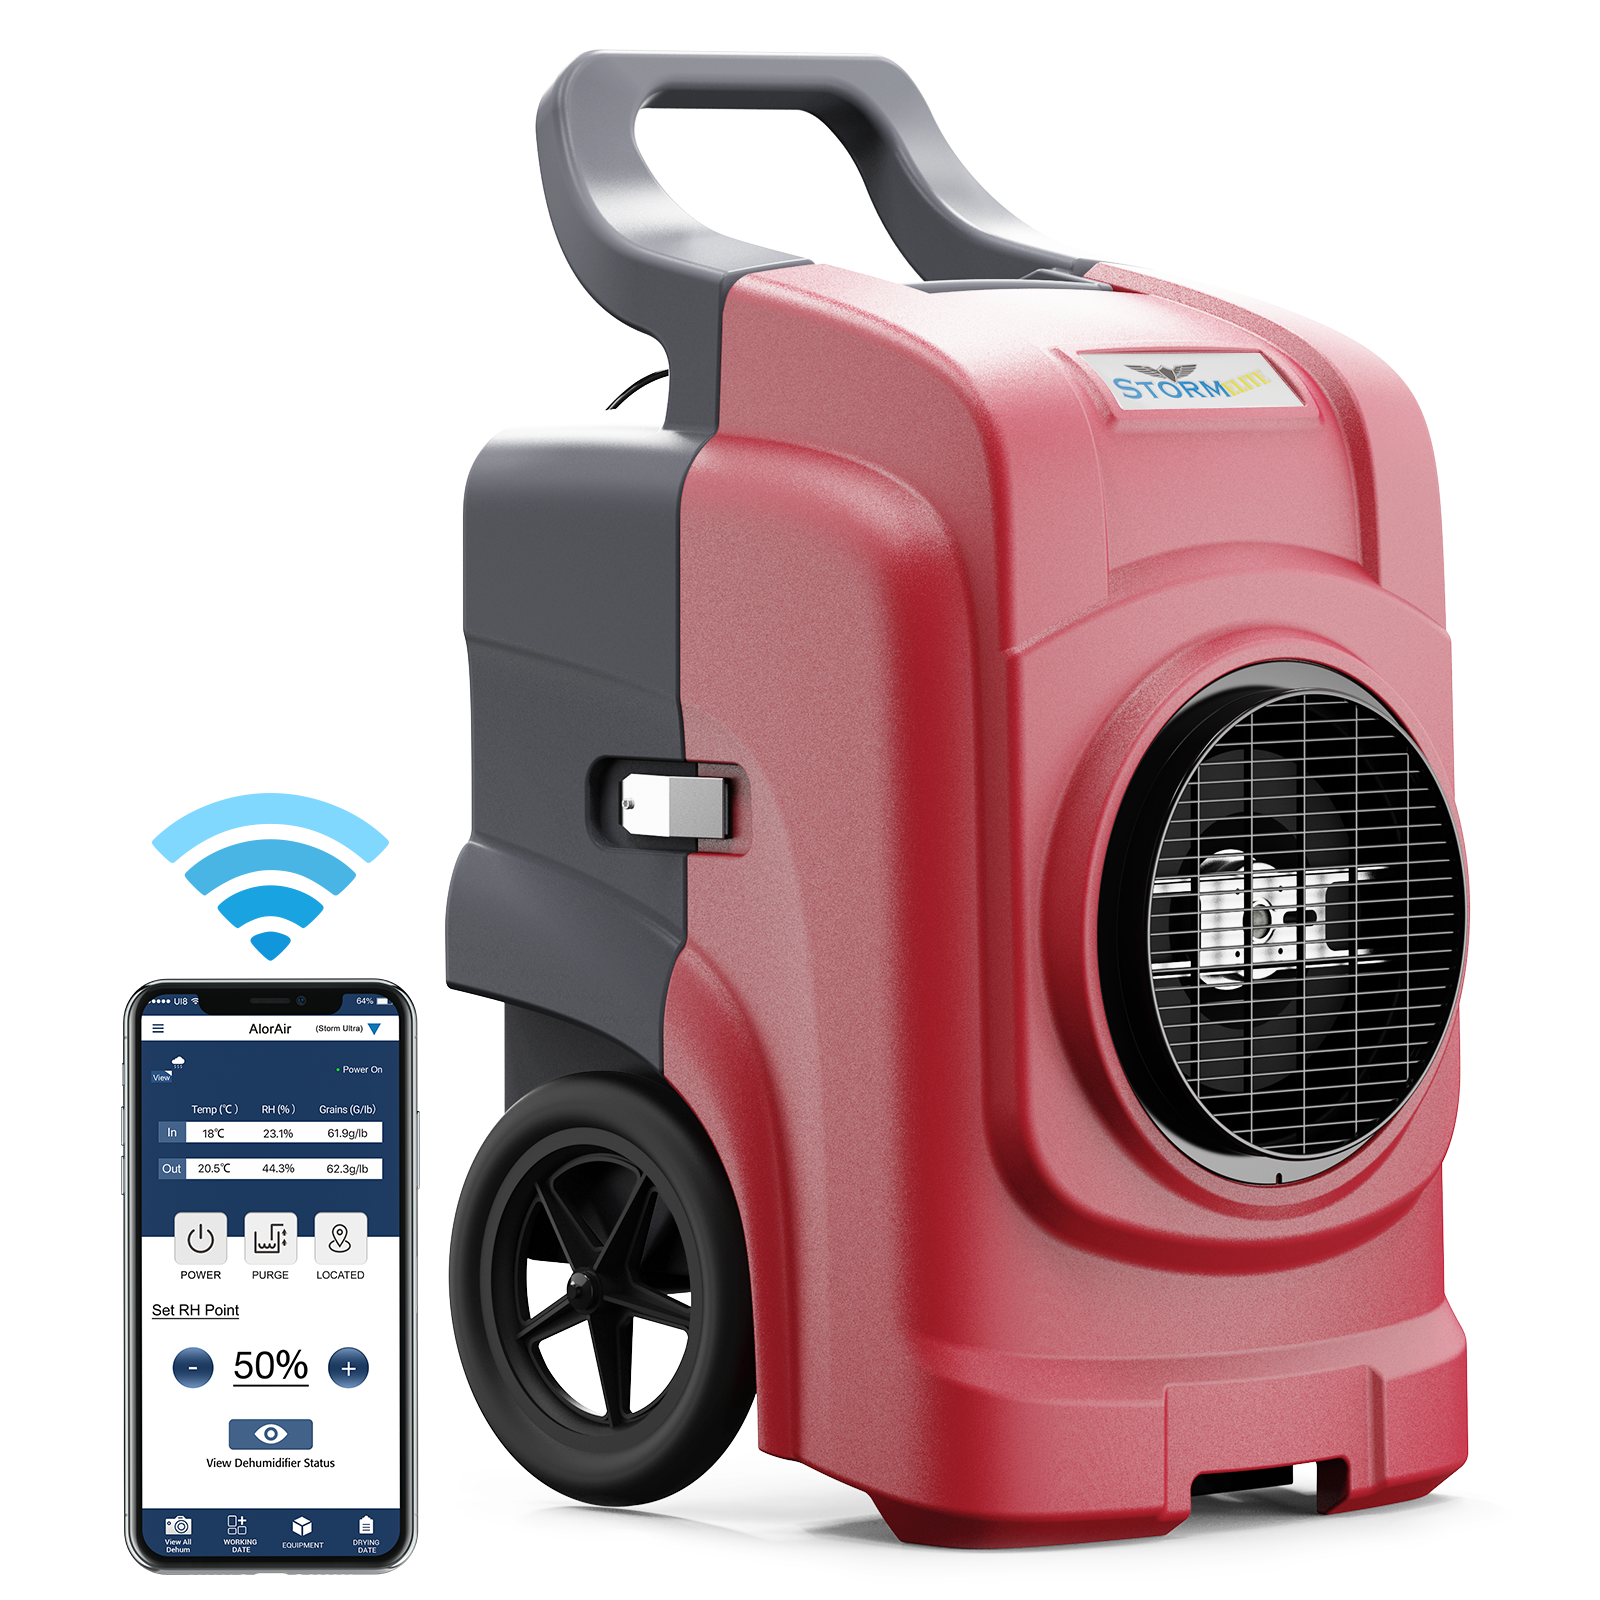 AlorAir Storm Elite Smart WiFi Dehumidifier, 125 PPD Commercial Dehumidifier with Pump, Roto-Mold Body, LCD Display, cETL, 5 Years Warranty, Industrial dehumidifier for Disaster Restoration